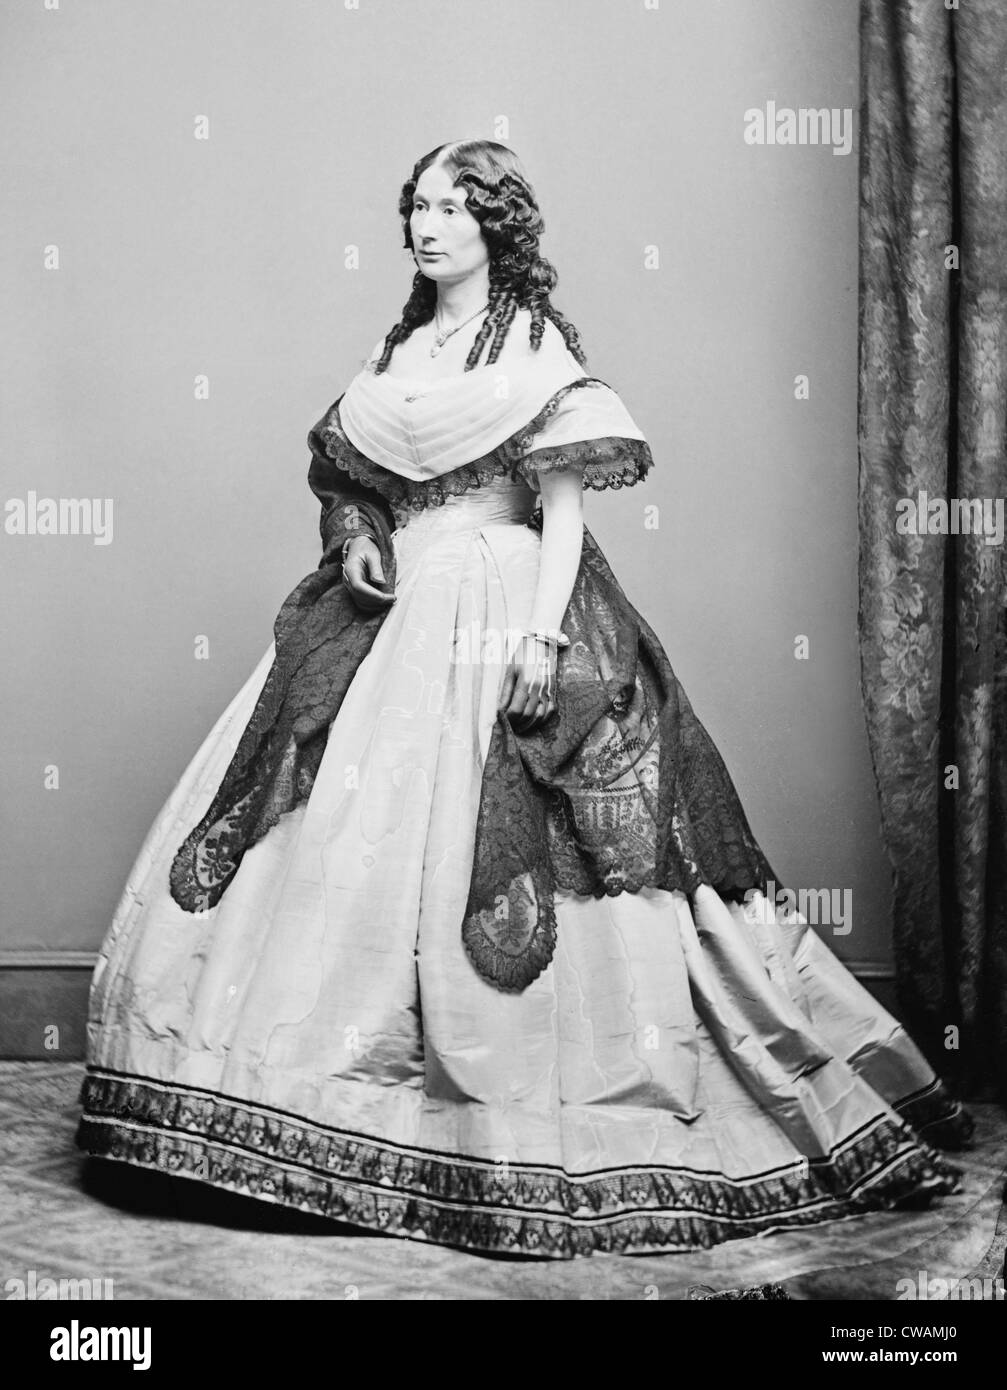 Laura Keene (1820-1873), English born actress, managed the theater company that performed OUR AMERICAN COUSIN at Ford's Theater Stock Photo